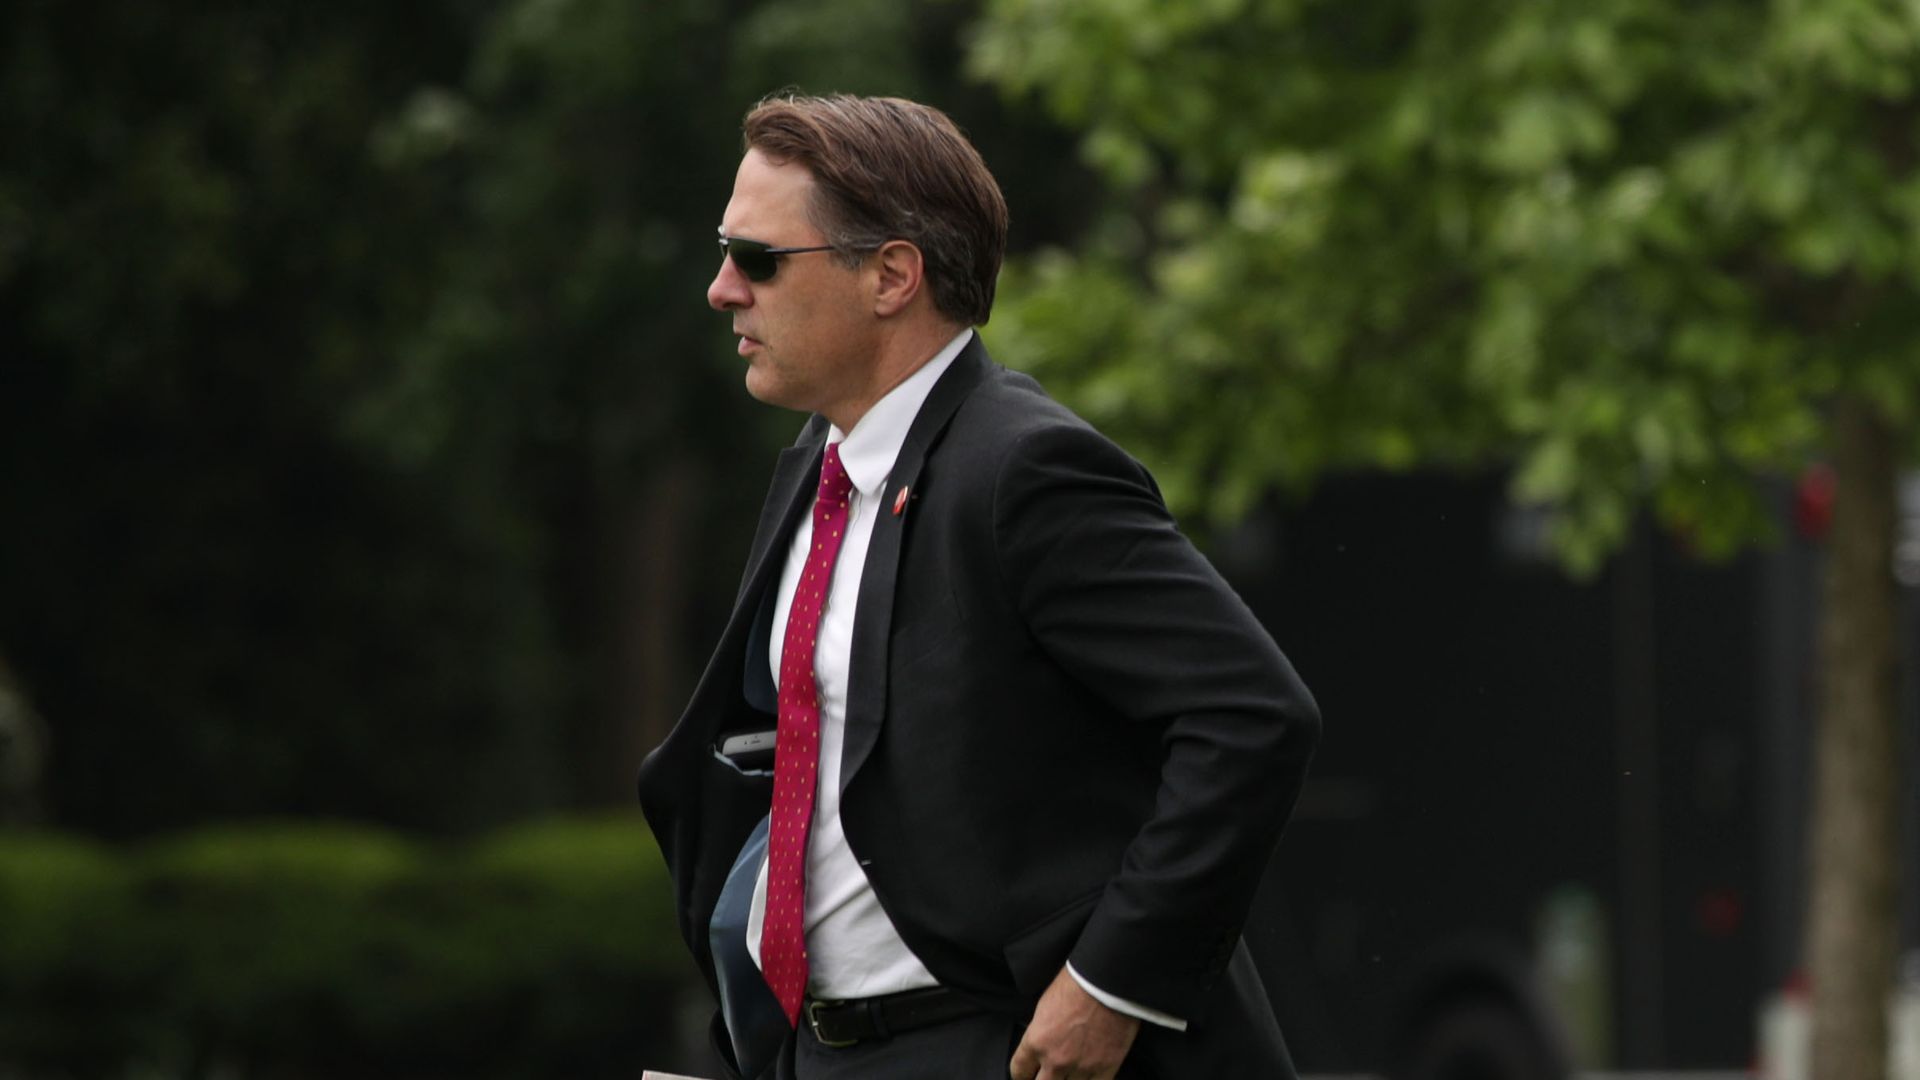 Assistant to the President and Senior Advisor to the Chief of Staff Robert Blairwalks on the South Lawn May 8, 2019 in Washington, DC.